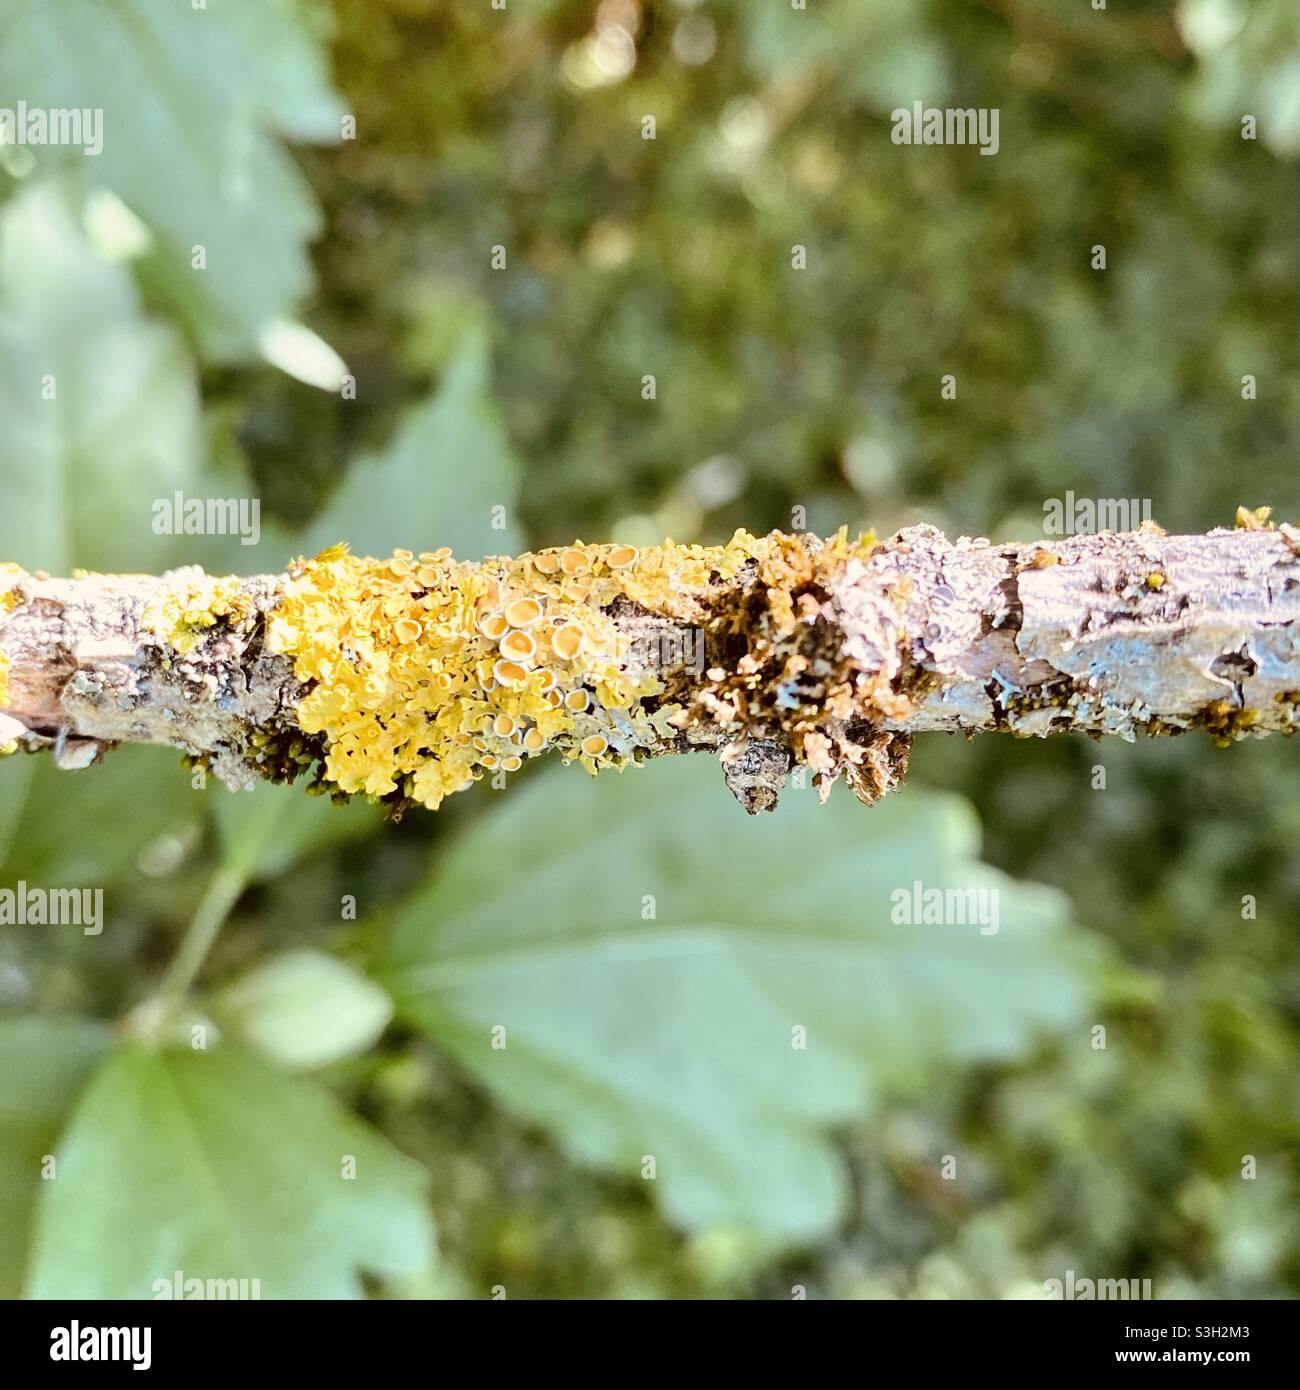 Yellow lichen on a tree branch Stock Photo